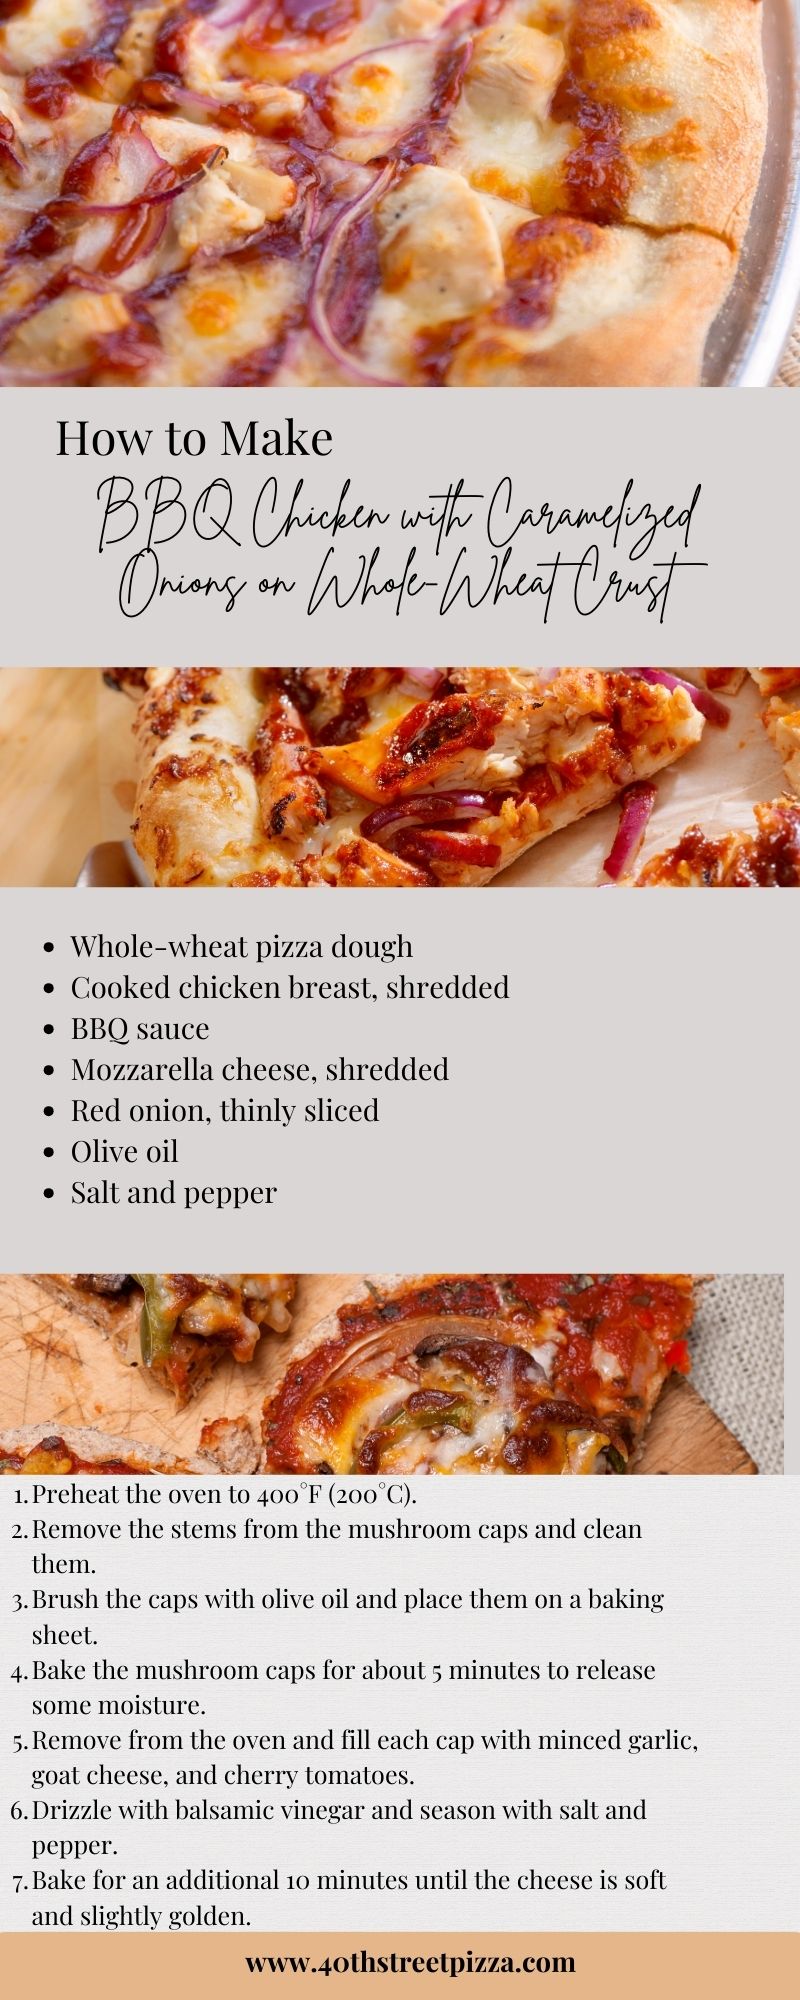 BBQ Chicken with Caramelized Onions on Whole-Wheat Crust infographic